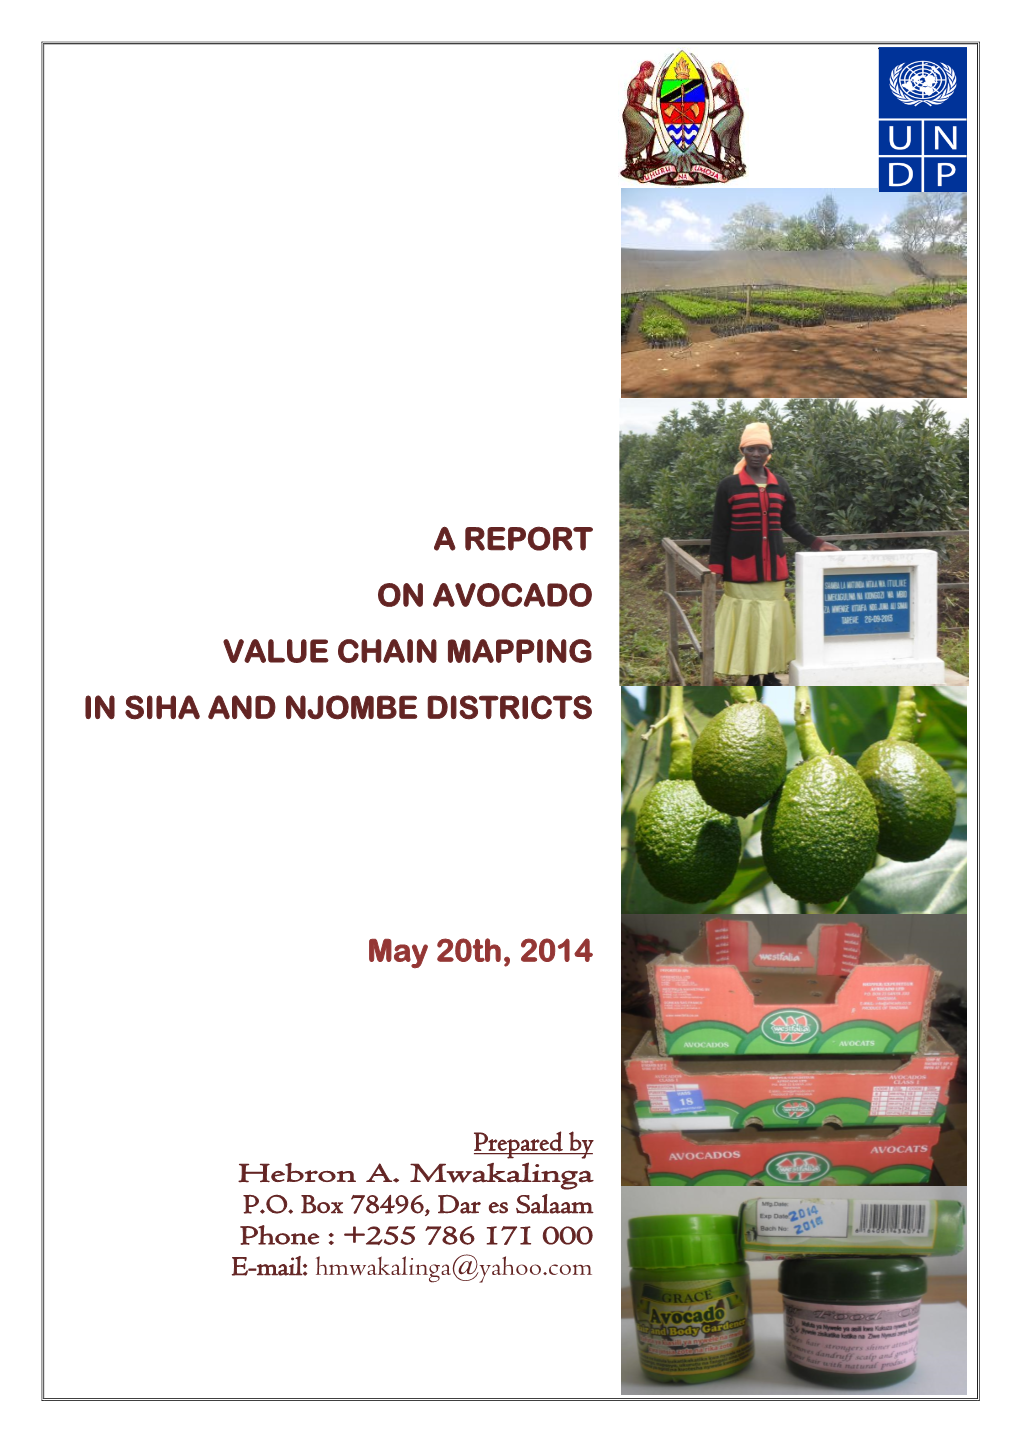 A Report on Avocado Value Chain Mapping in Siha and Njombe Districts